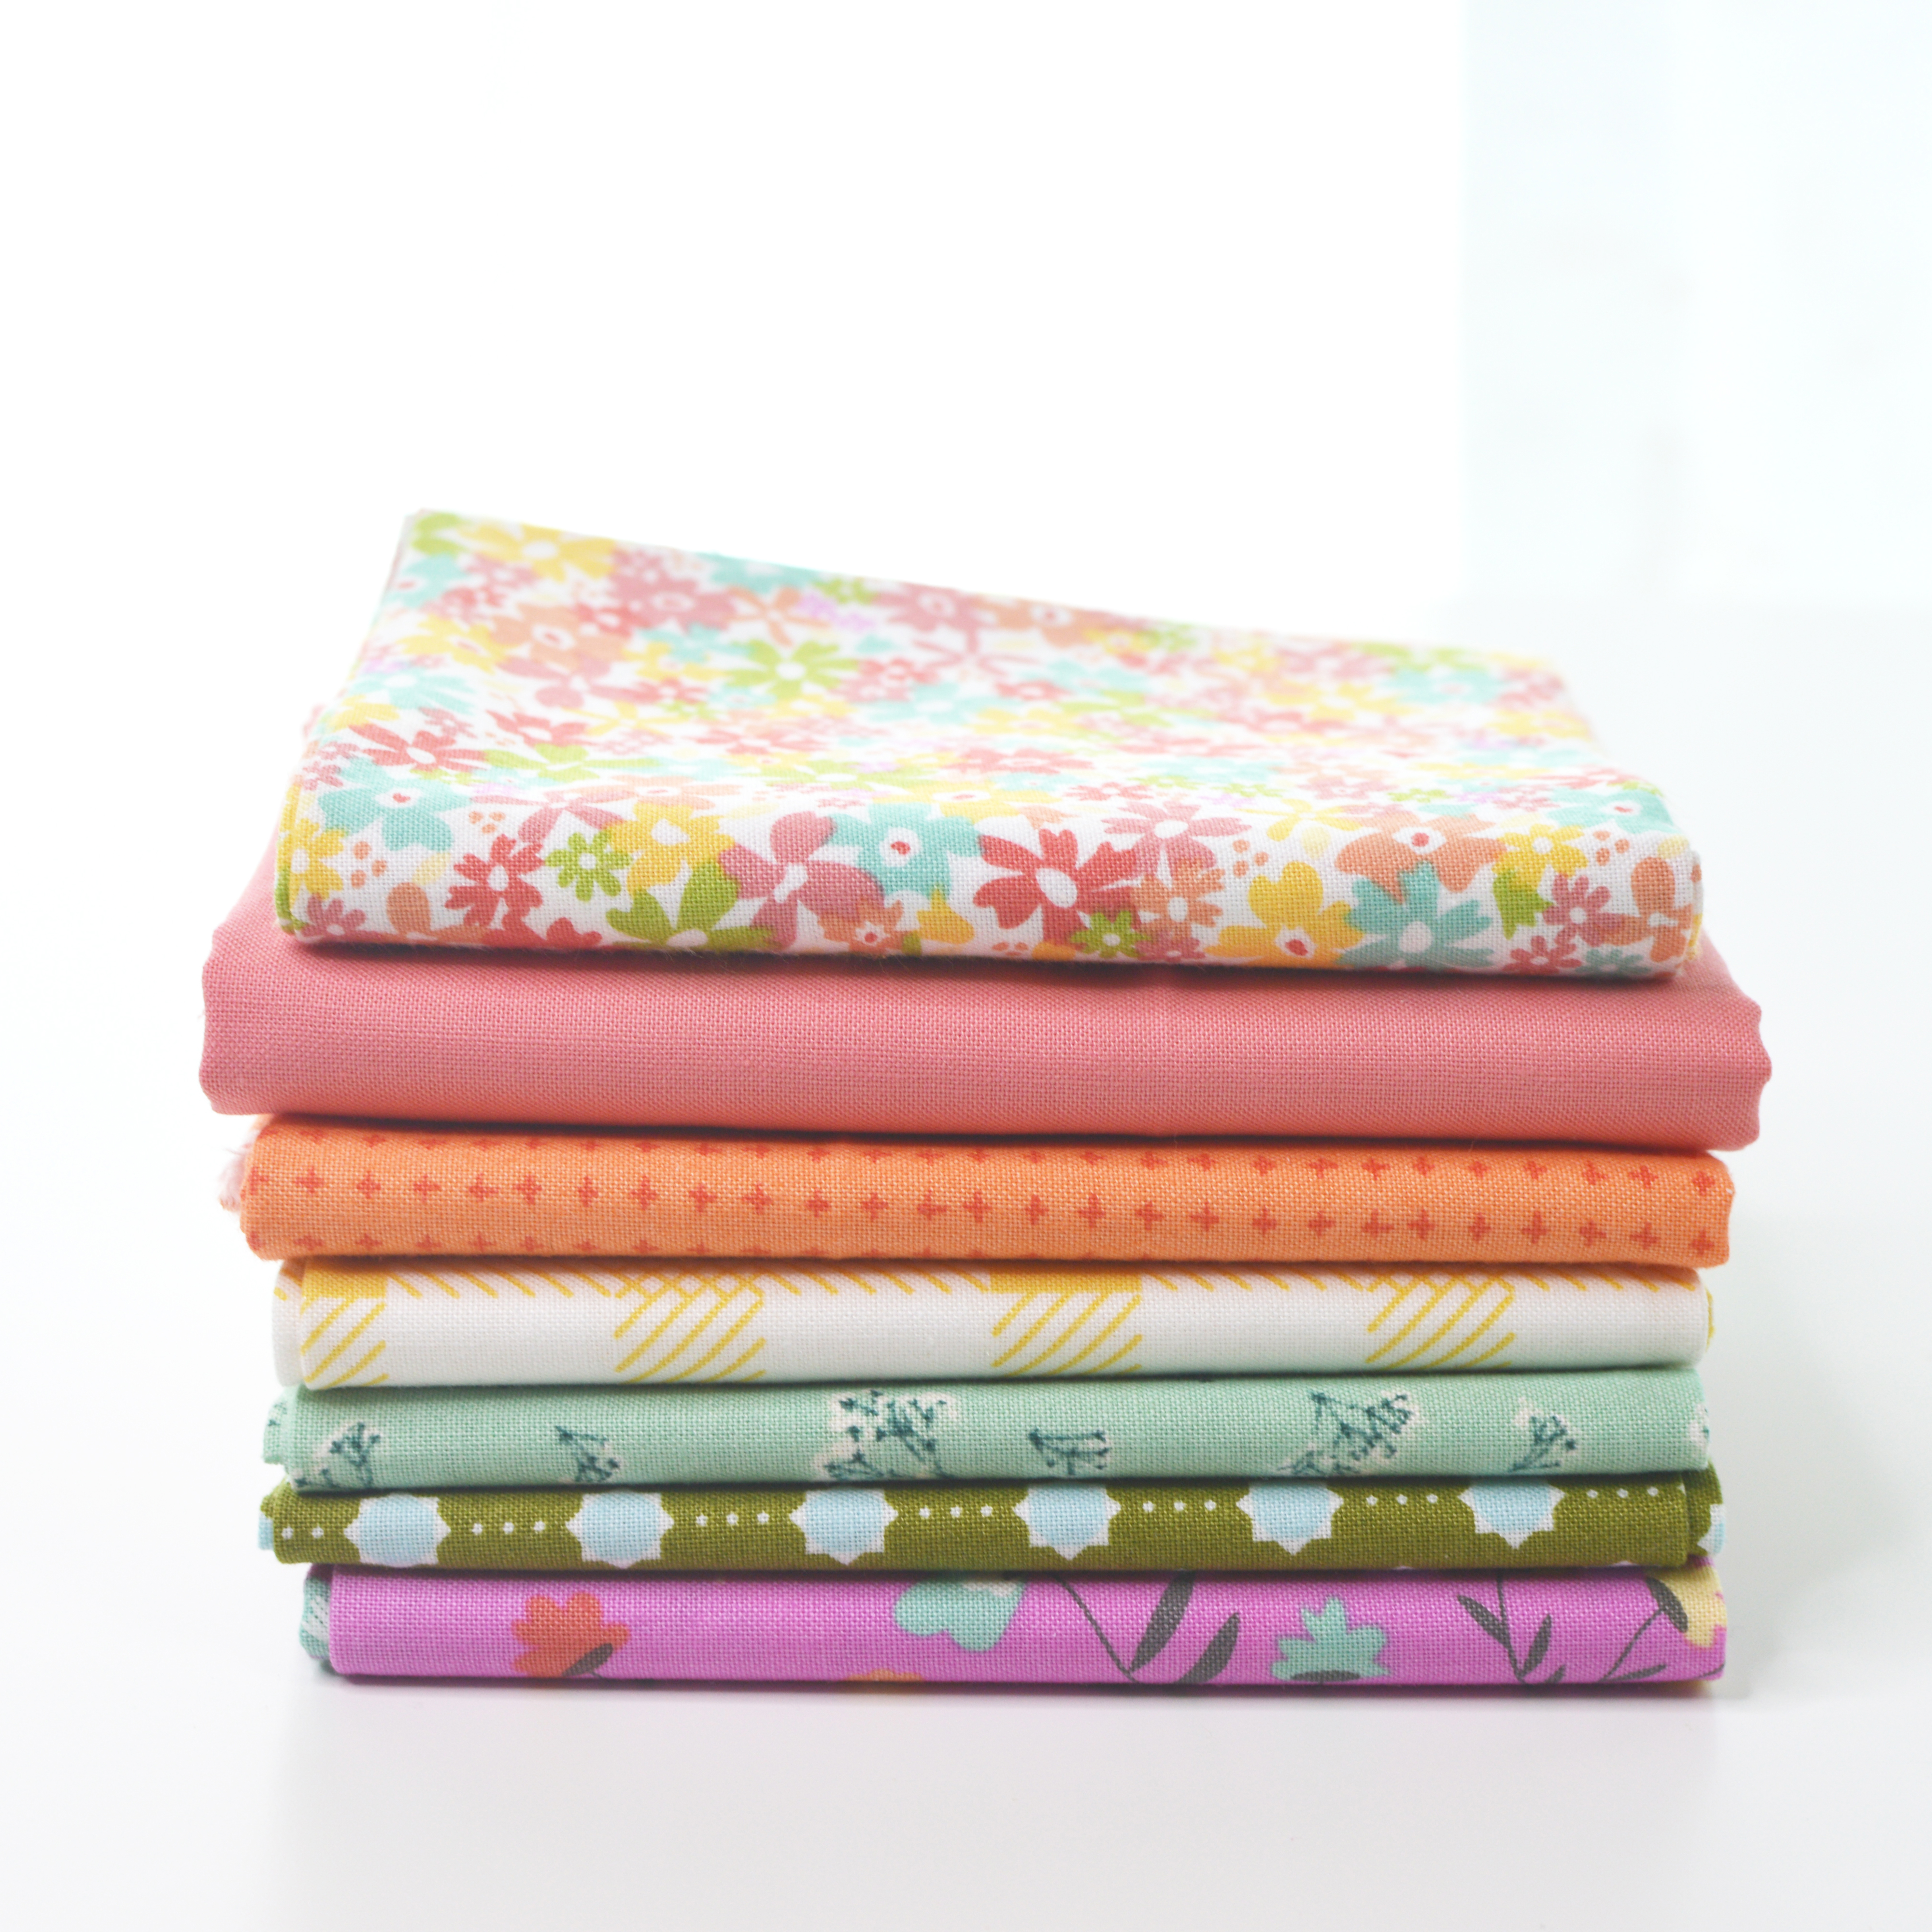 quilt fabric stack